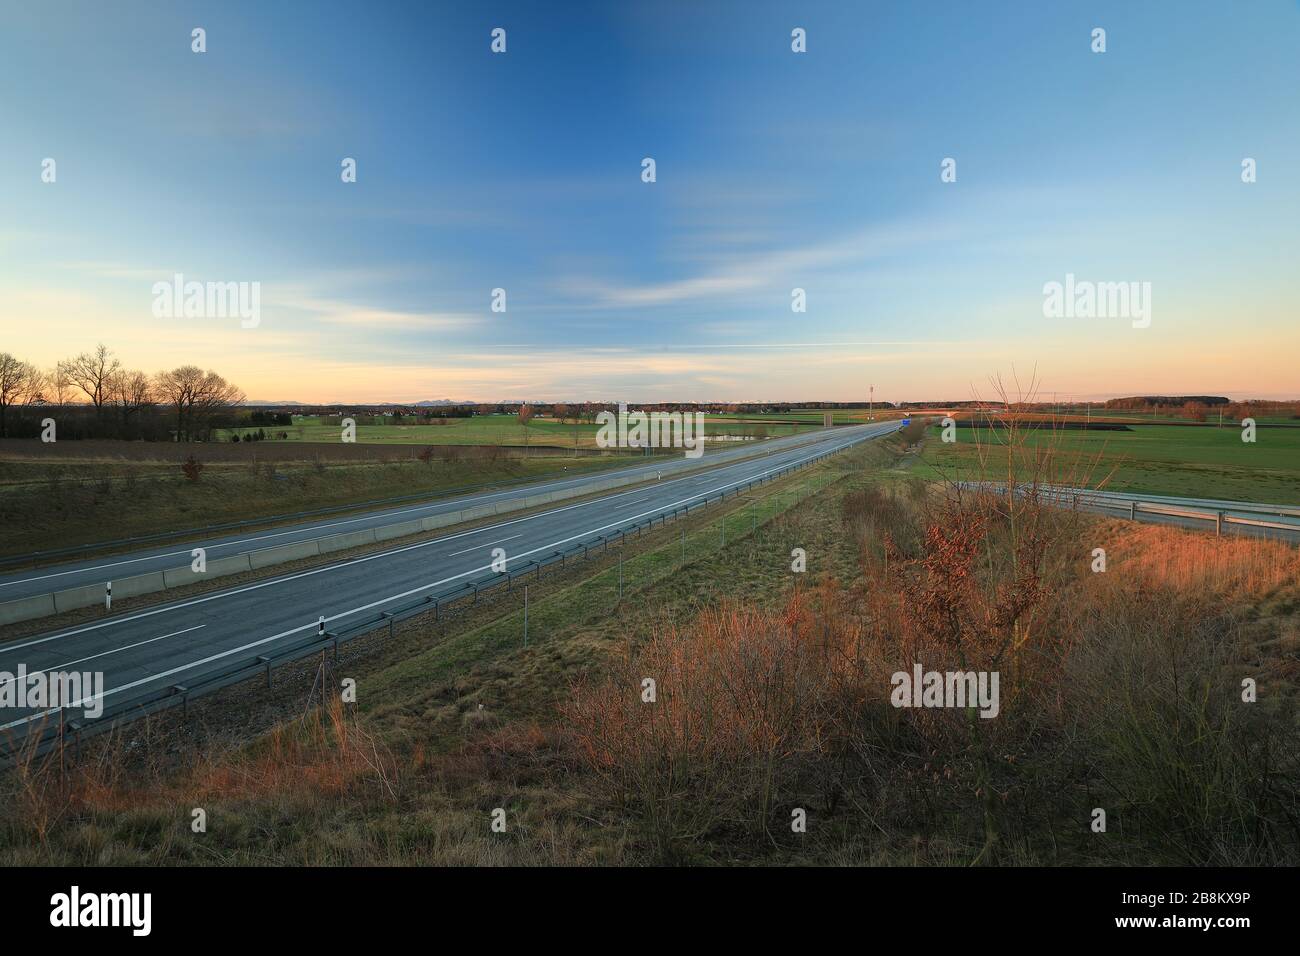 A94 district Pastetten, Germany Stock Photo